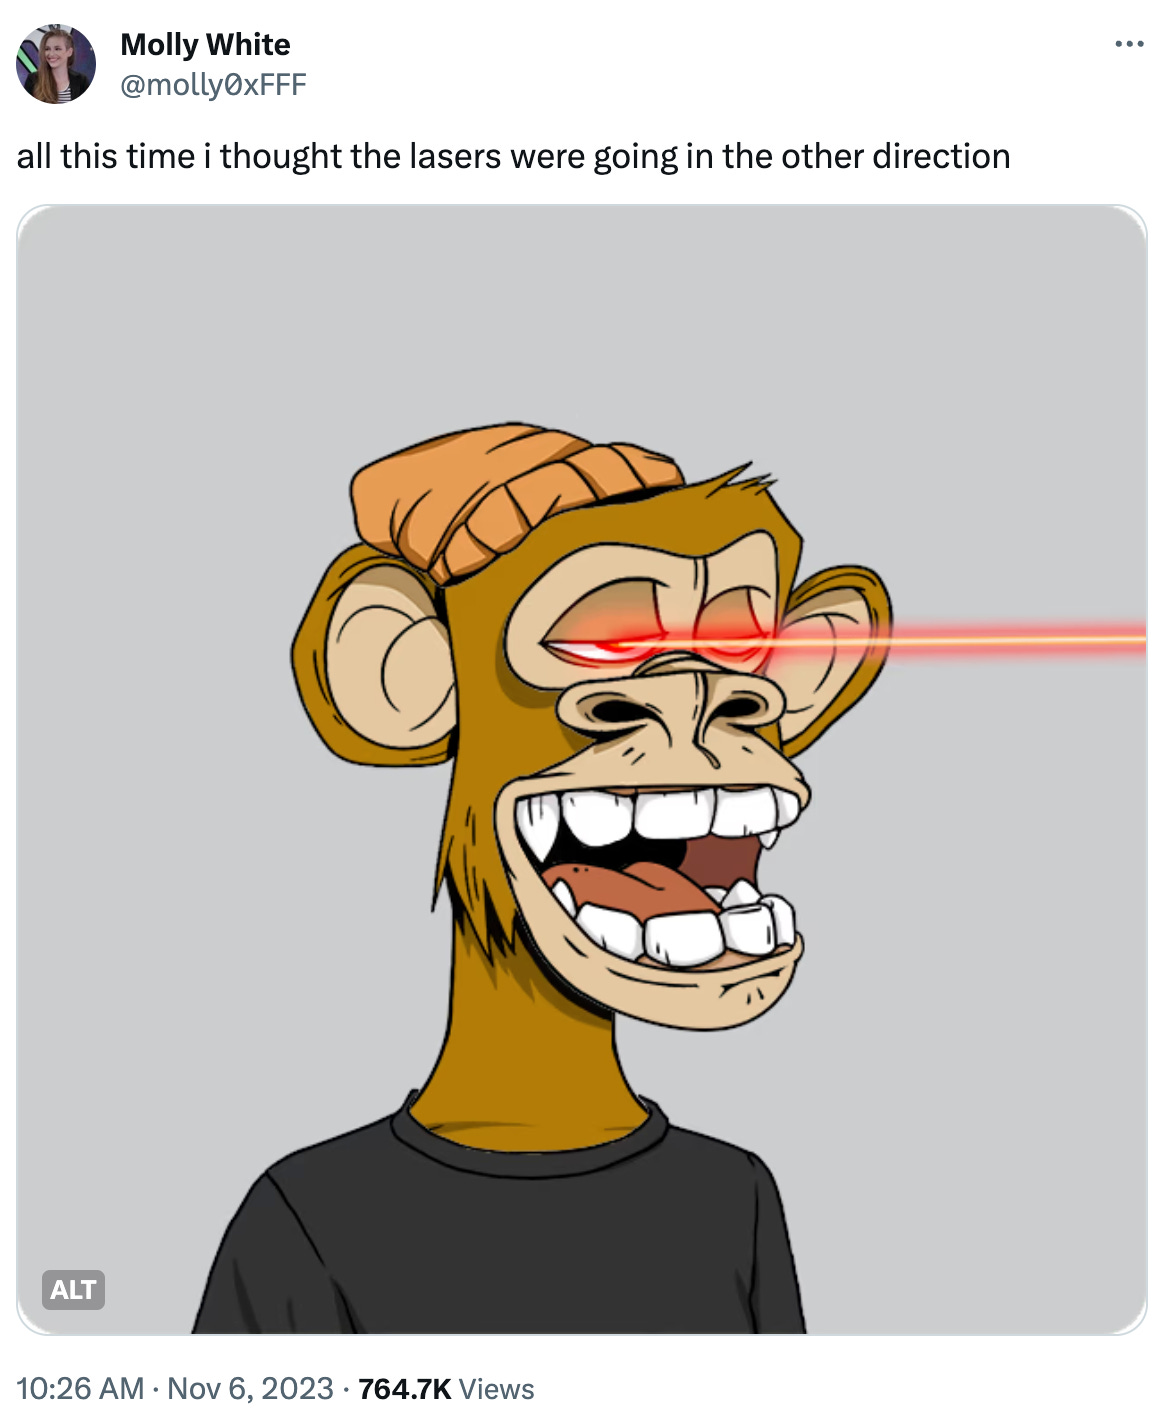 Tweet by Molly White with text "all this time i thought the lasers were going in the other direction". Image: Bored Ape #9291. A brown-furred ape, wearing a slouchy orange beanie and black t-shirt, has its mouth open in a sort of smile. There are red laser beams shooting out of (or perhaps into) its eyes.